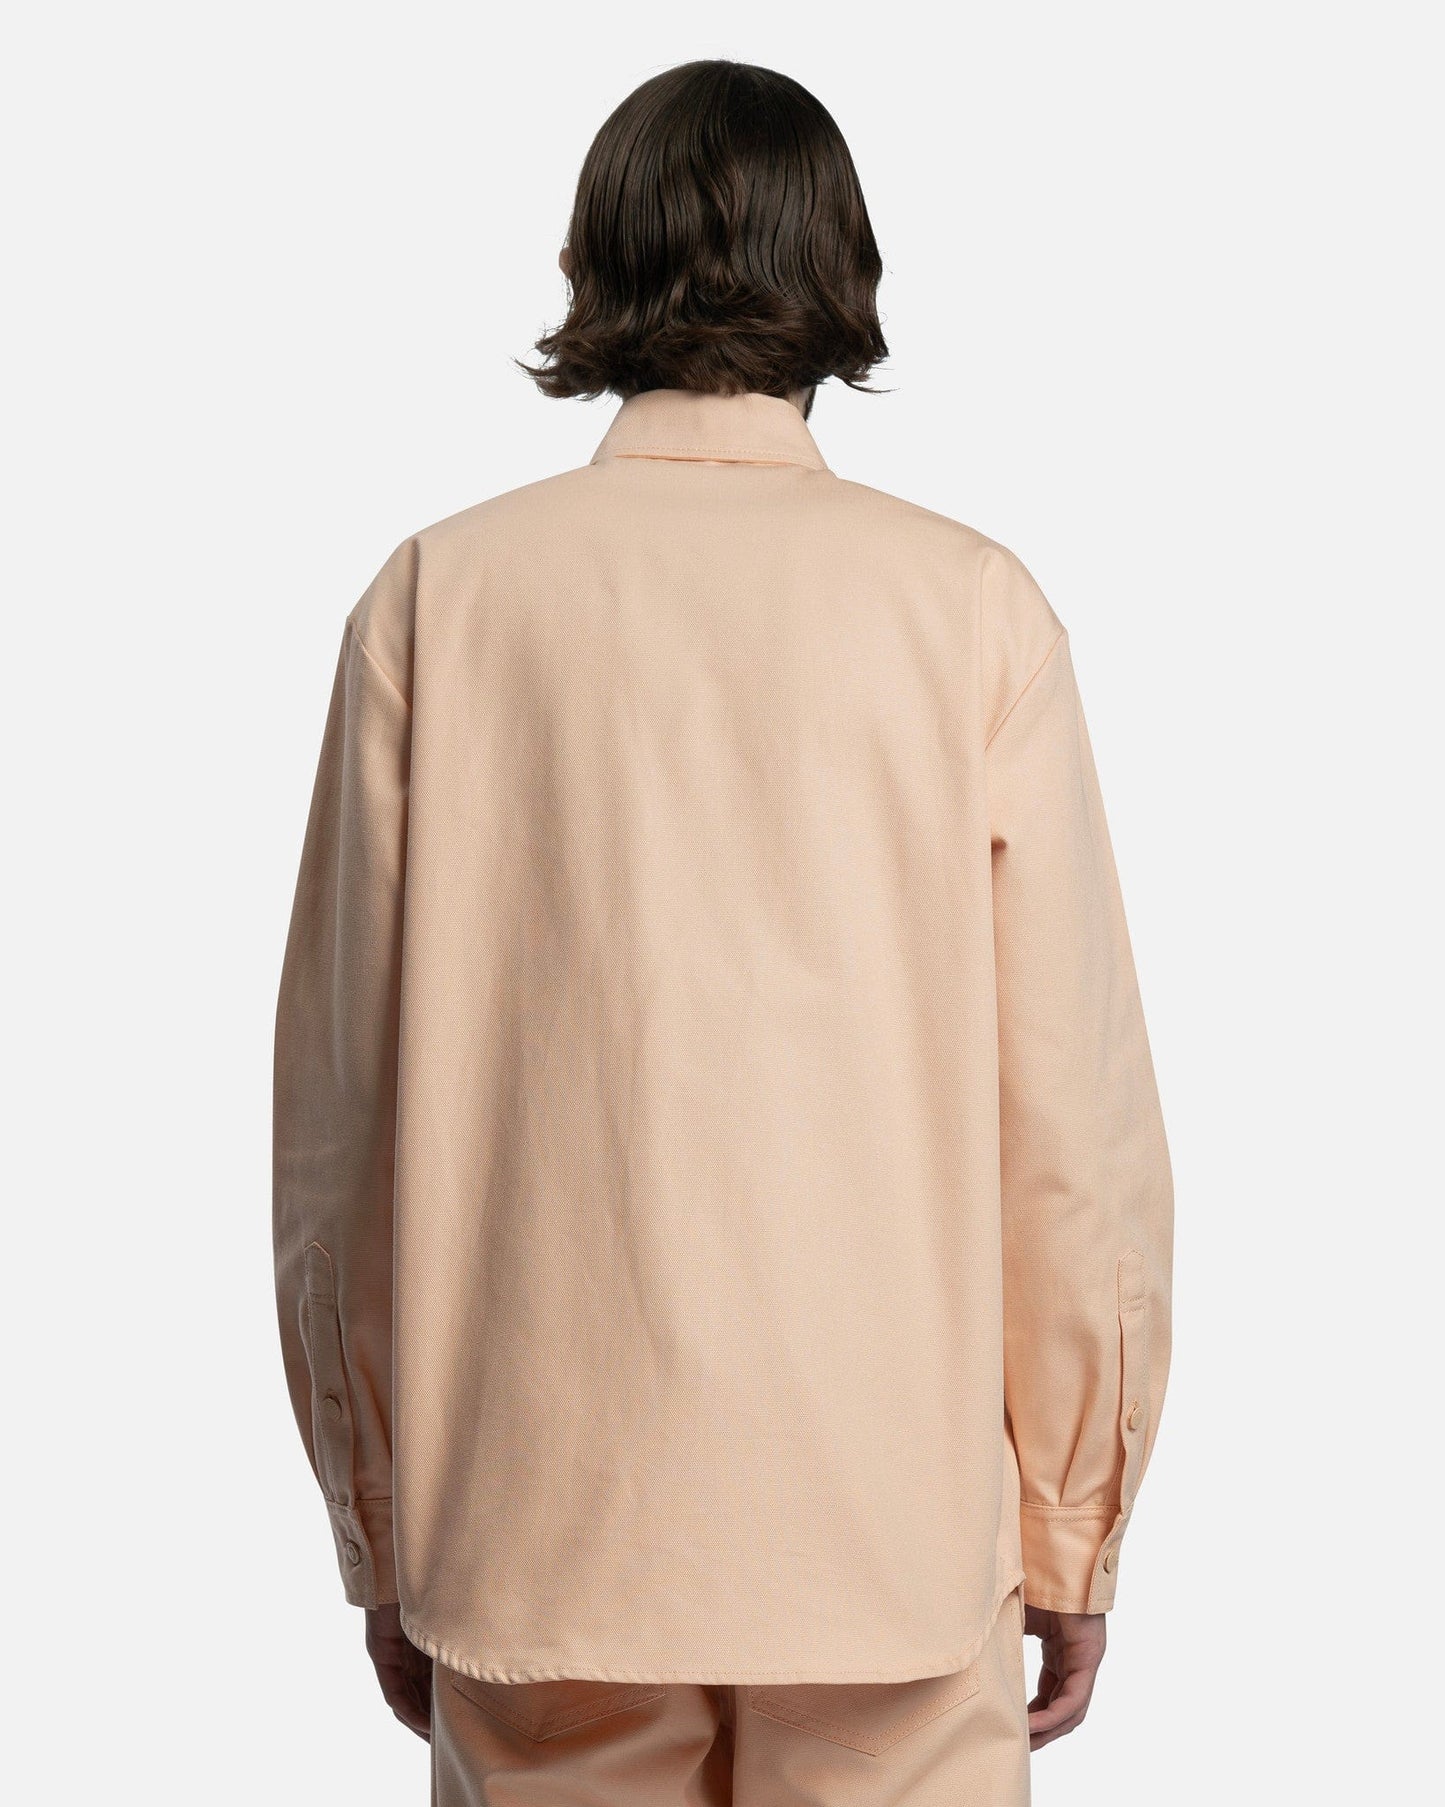 Raf Simons Men's Shirts Leather Patch Straight Fit Denim Shirt in Salmon